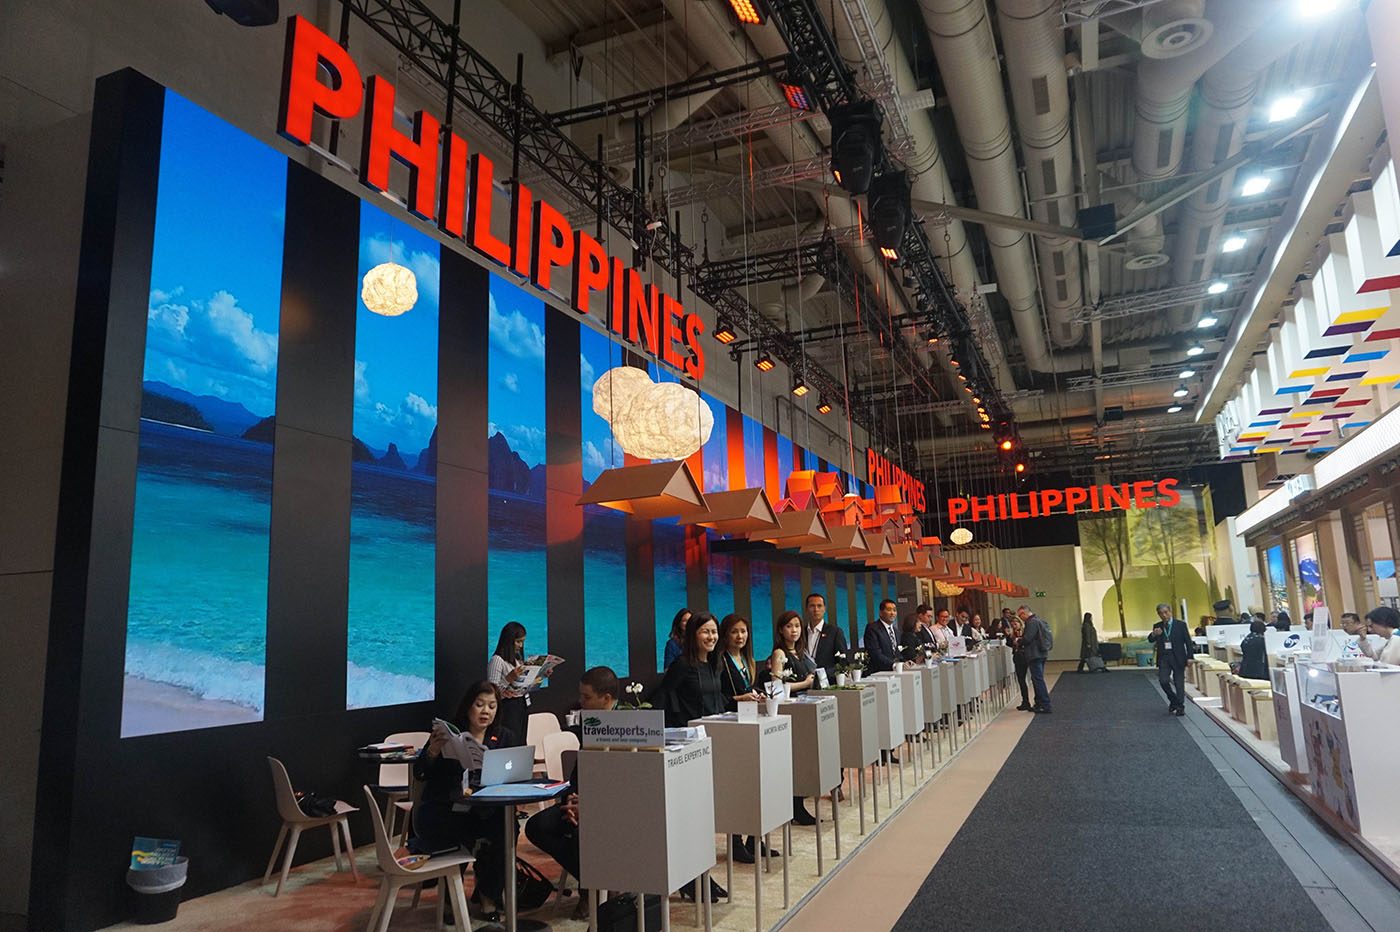 MORE FUN IN THE PHILIPPINES. A look at the booth of the Philippines during the trade fair in Berlin. 